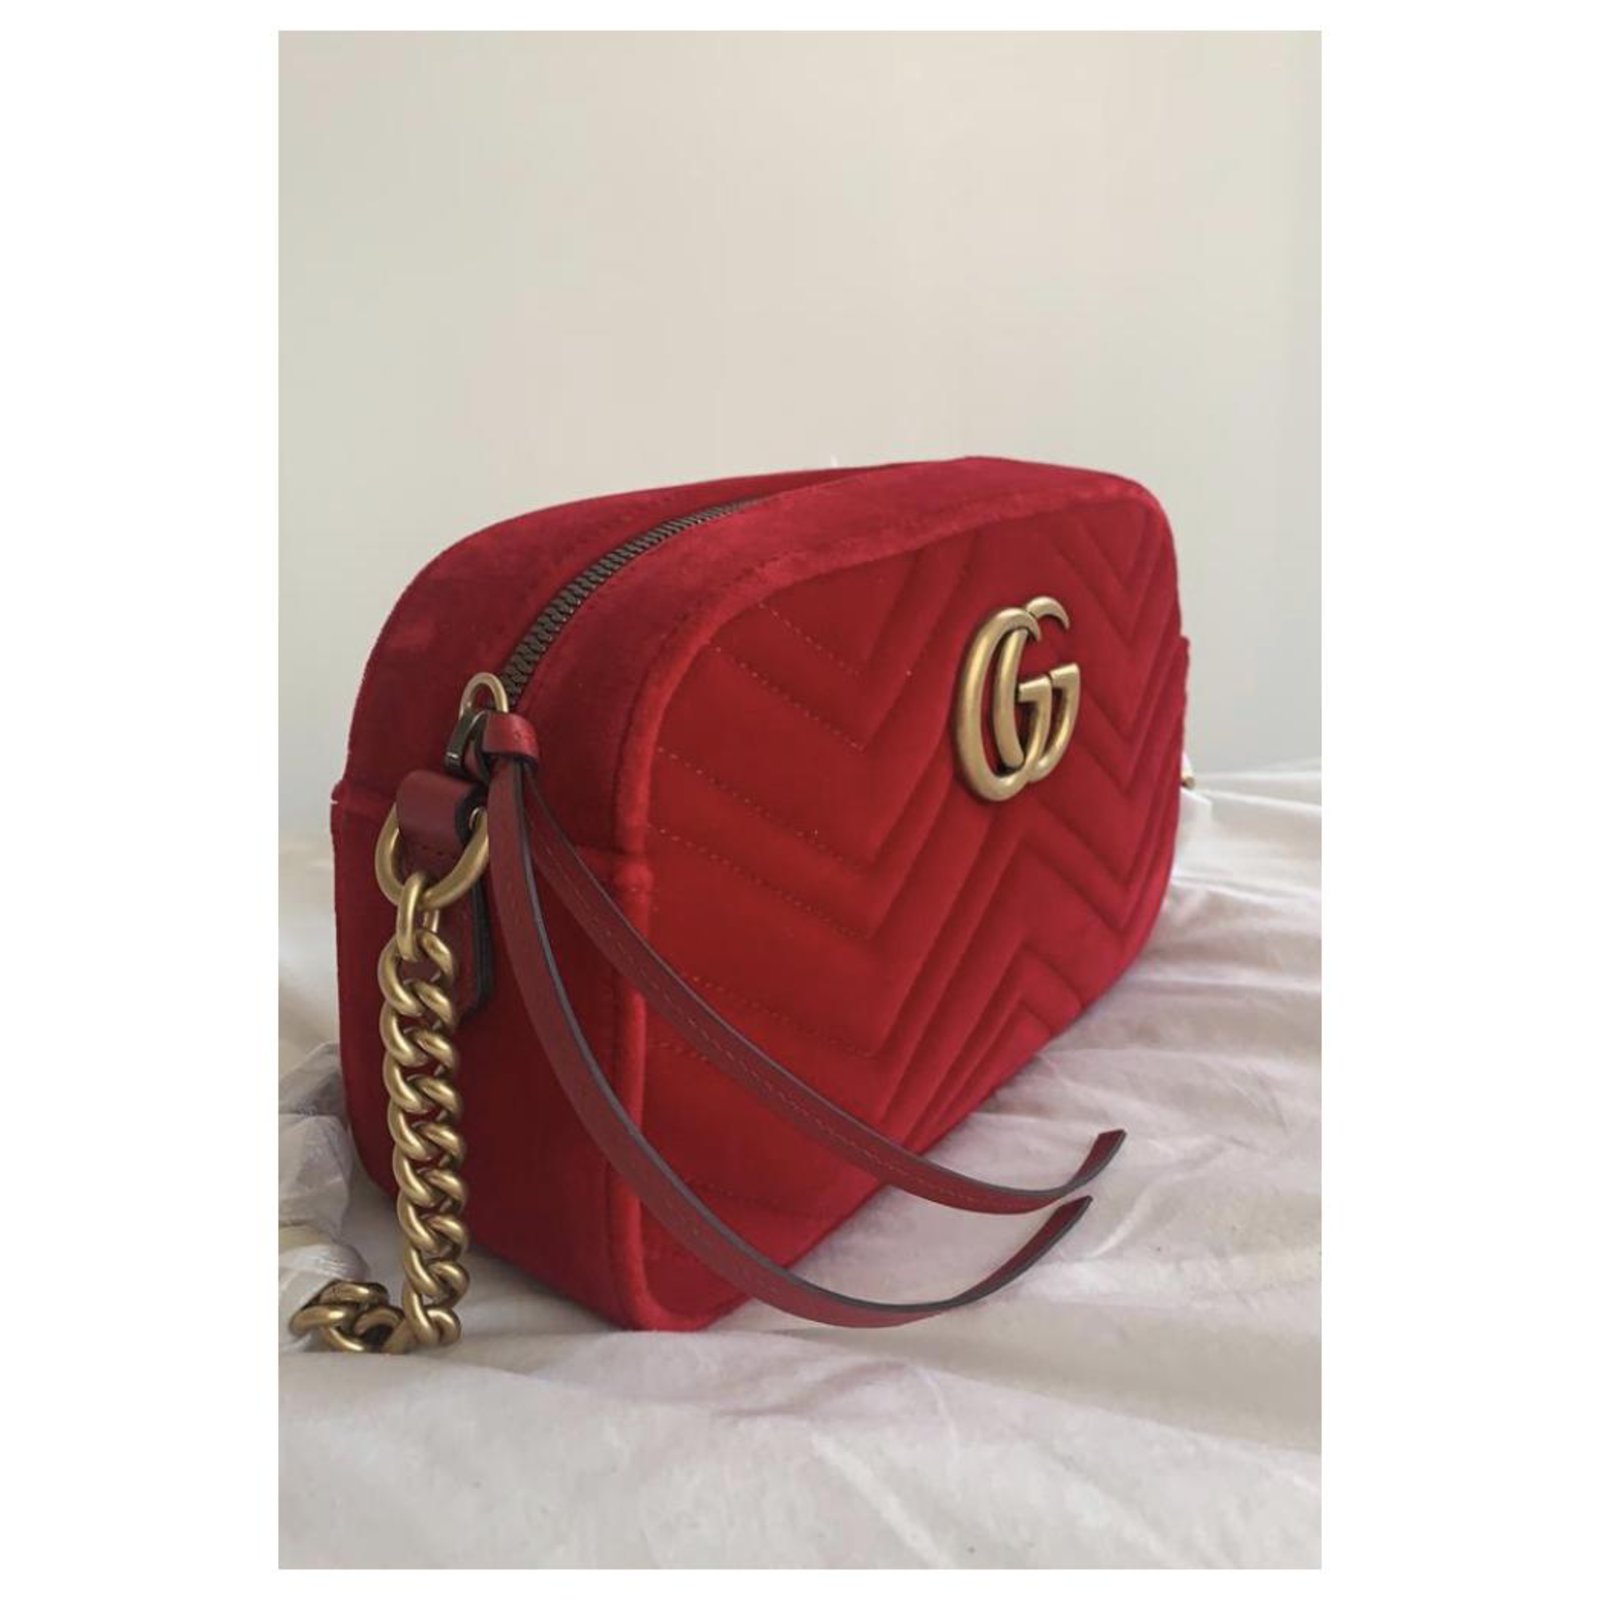 Red 'GG Marmont' quilted shoulder bag Gucci - Vitkac Canada